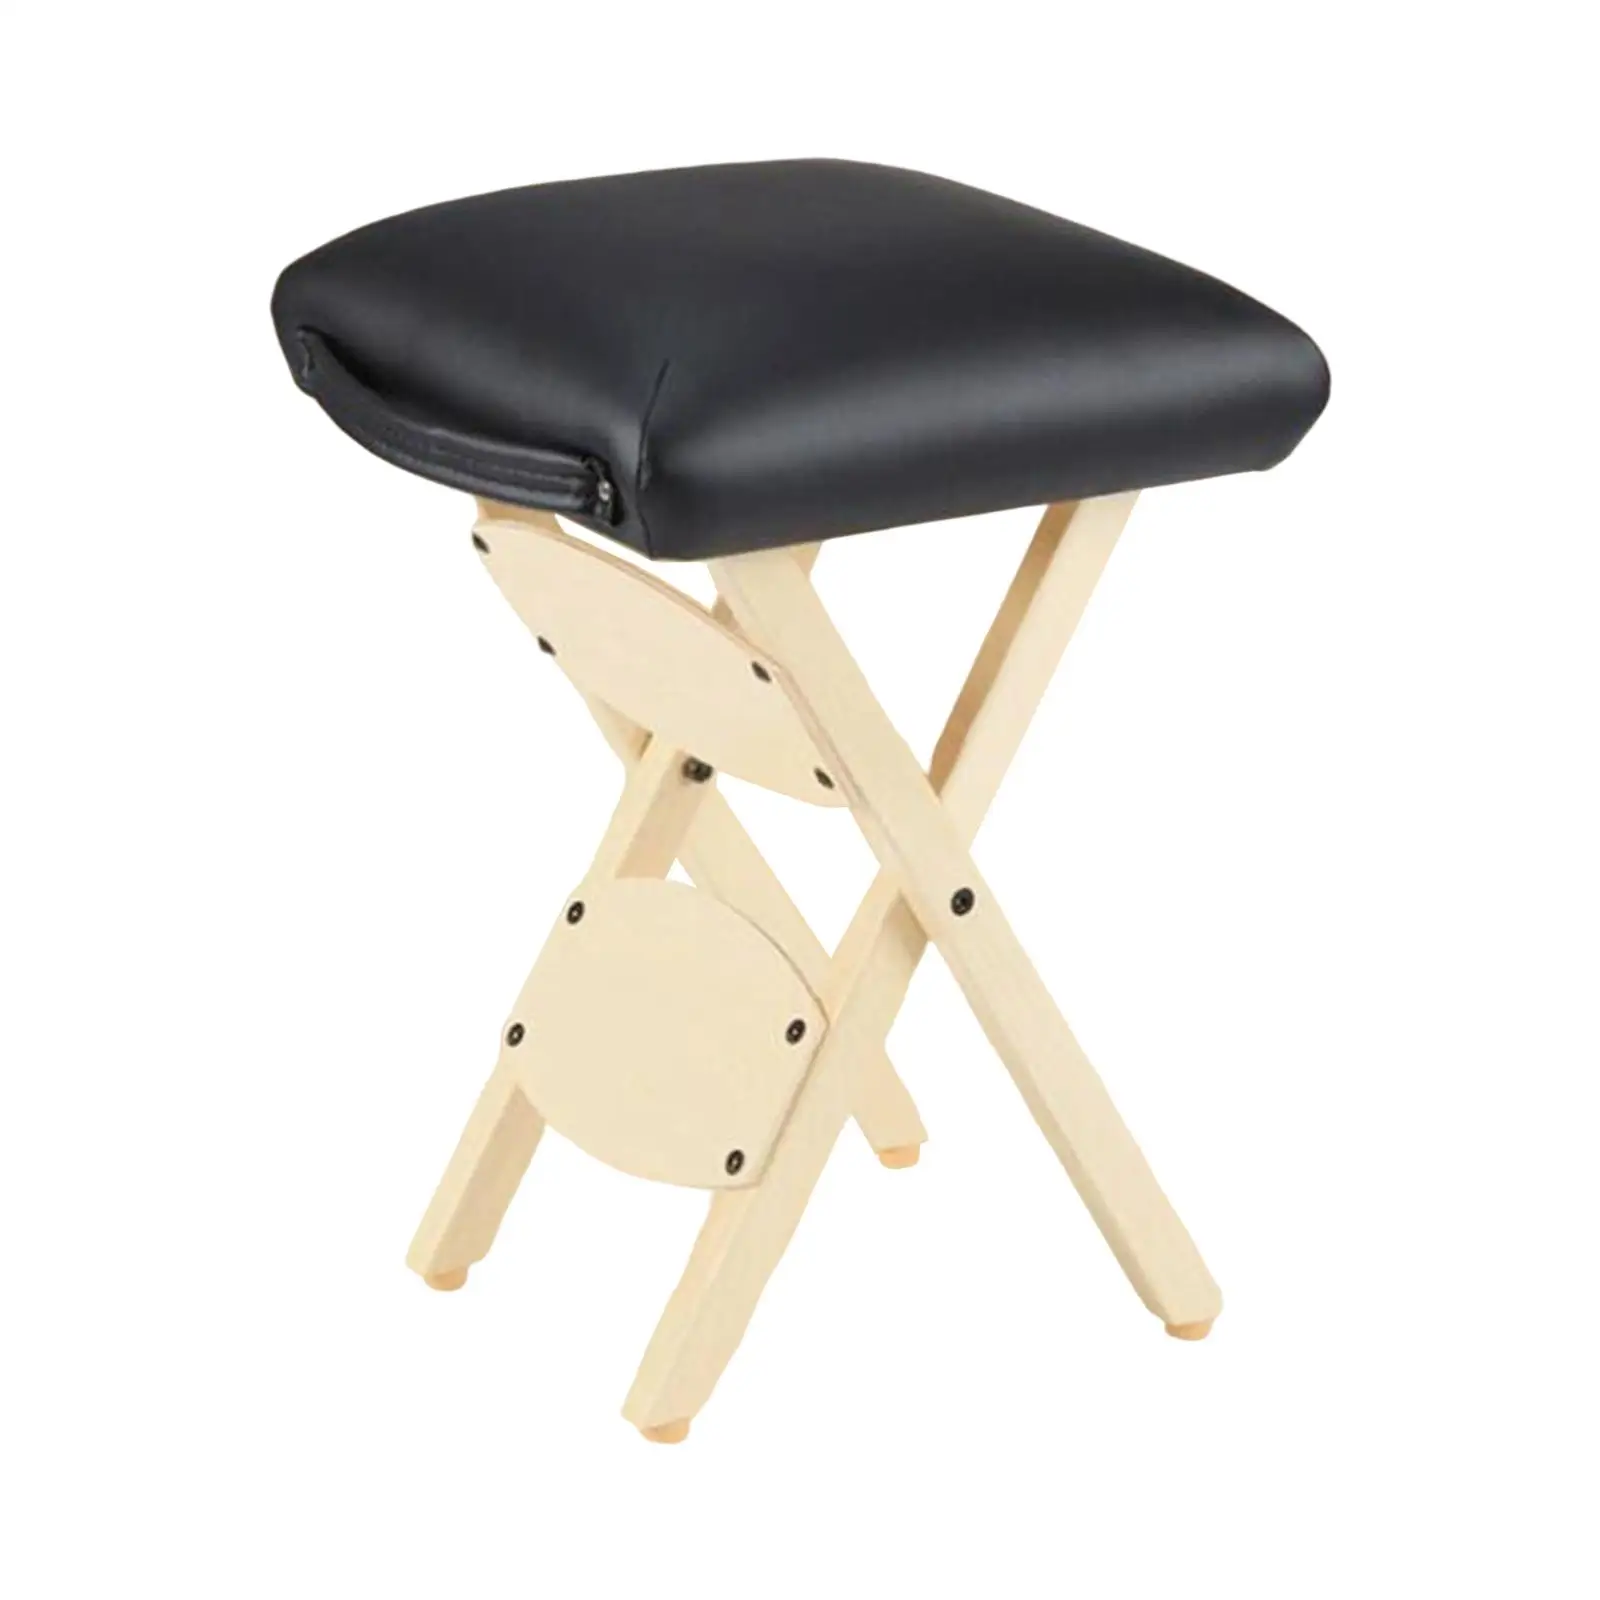 Portable Salon Stool with Footrest Nonslip Legs Ergonomic Comfortable Folding Chair for Facial Beauty Massage Task SPA